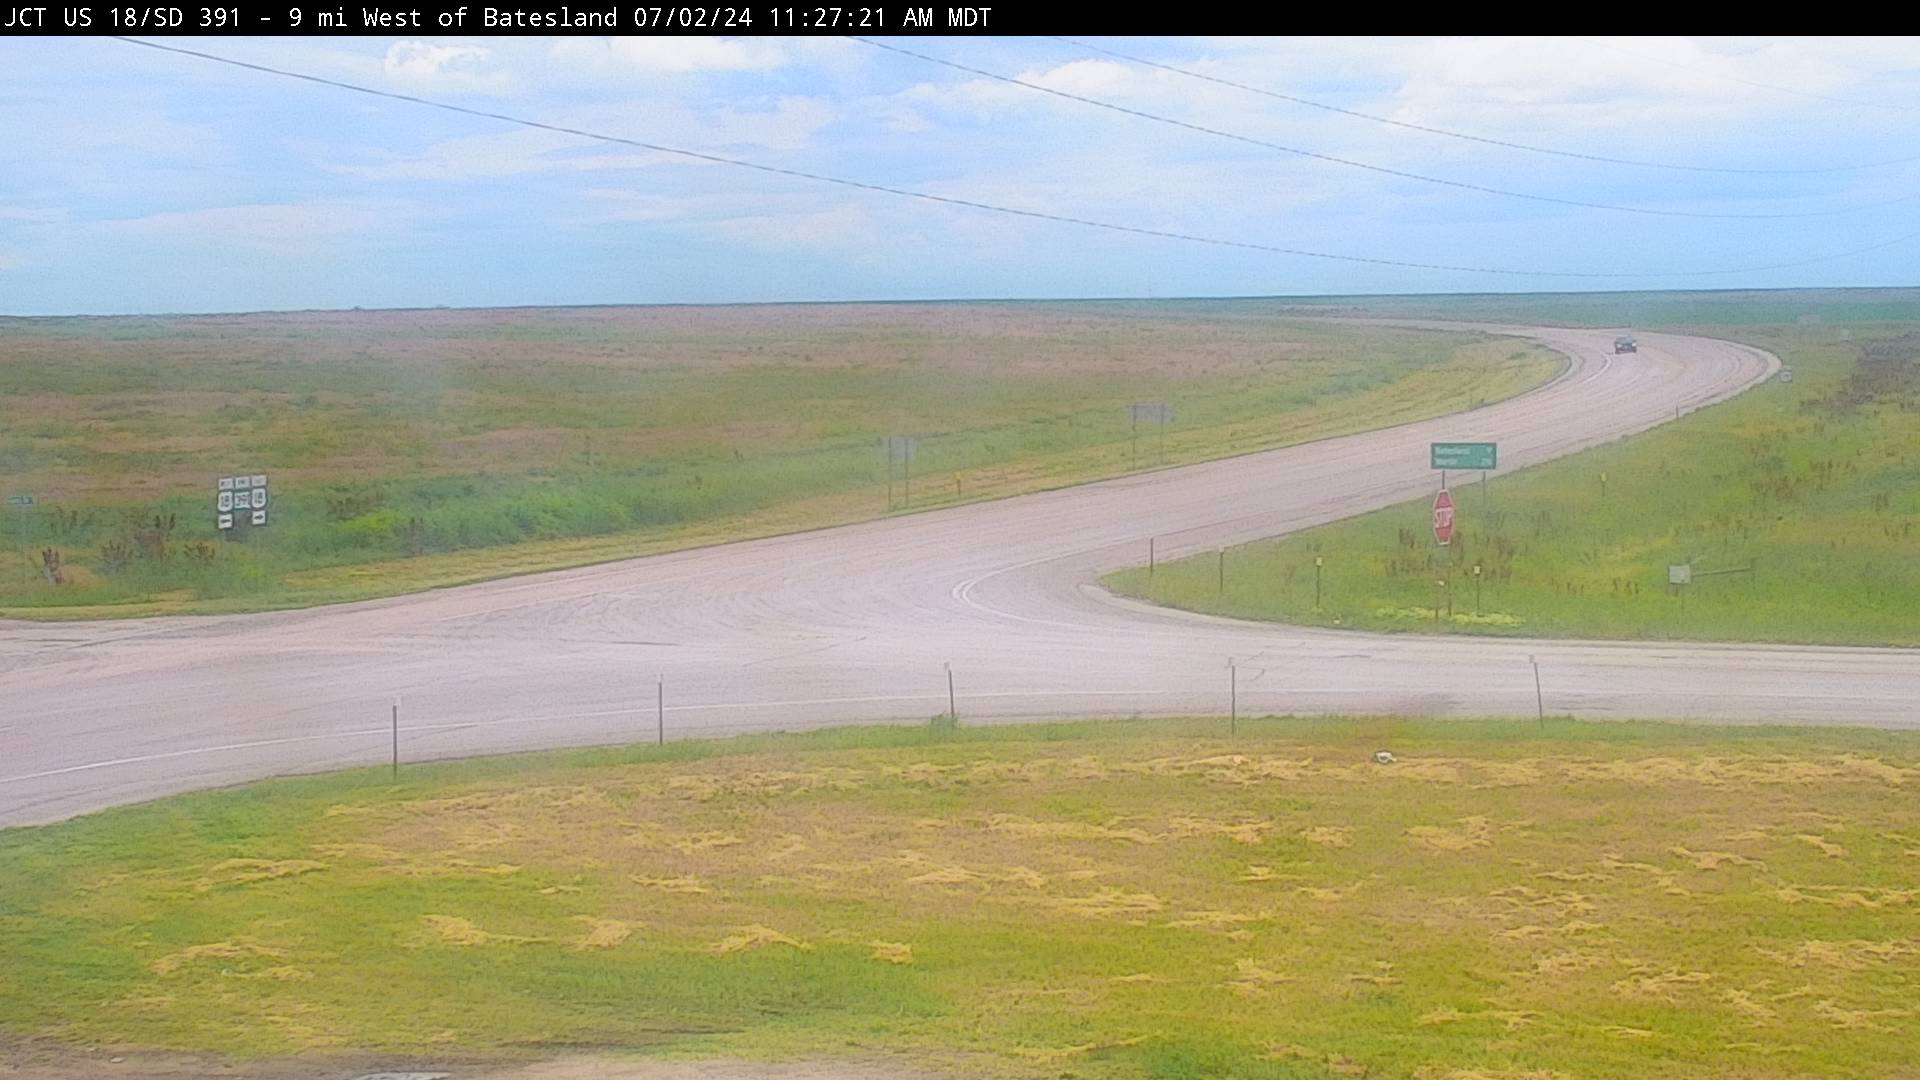 Southwest of town at junction US-18 & SD-391 - East Traffic Camera